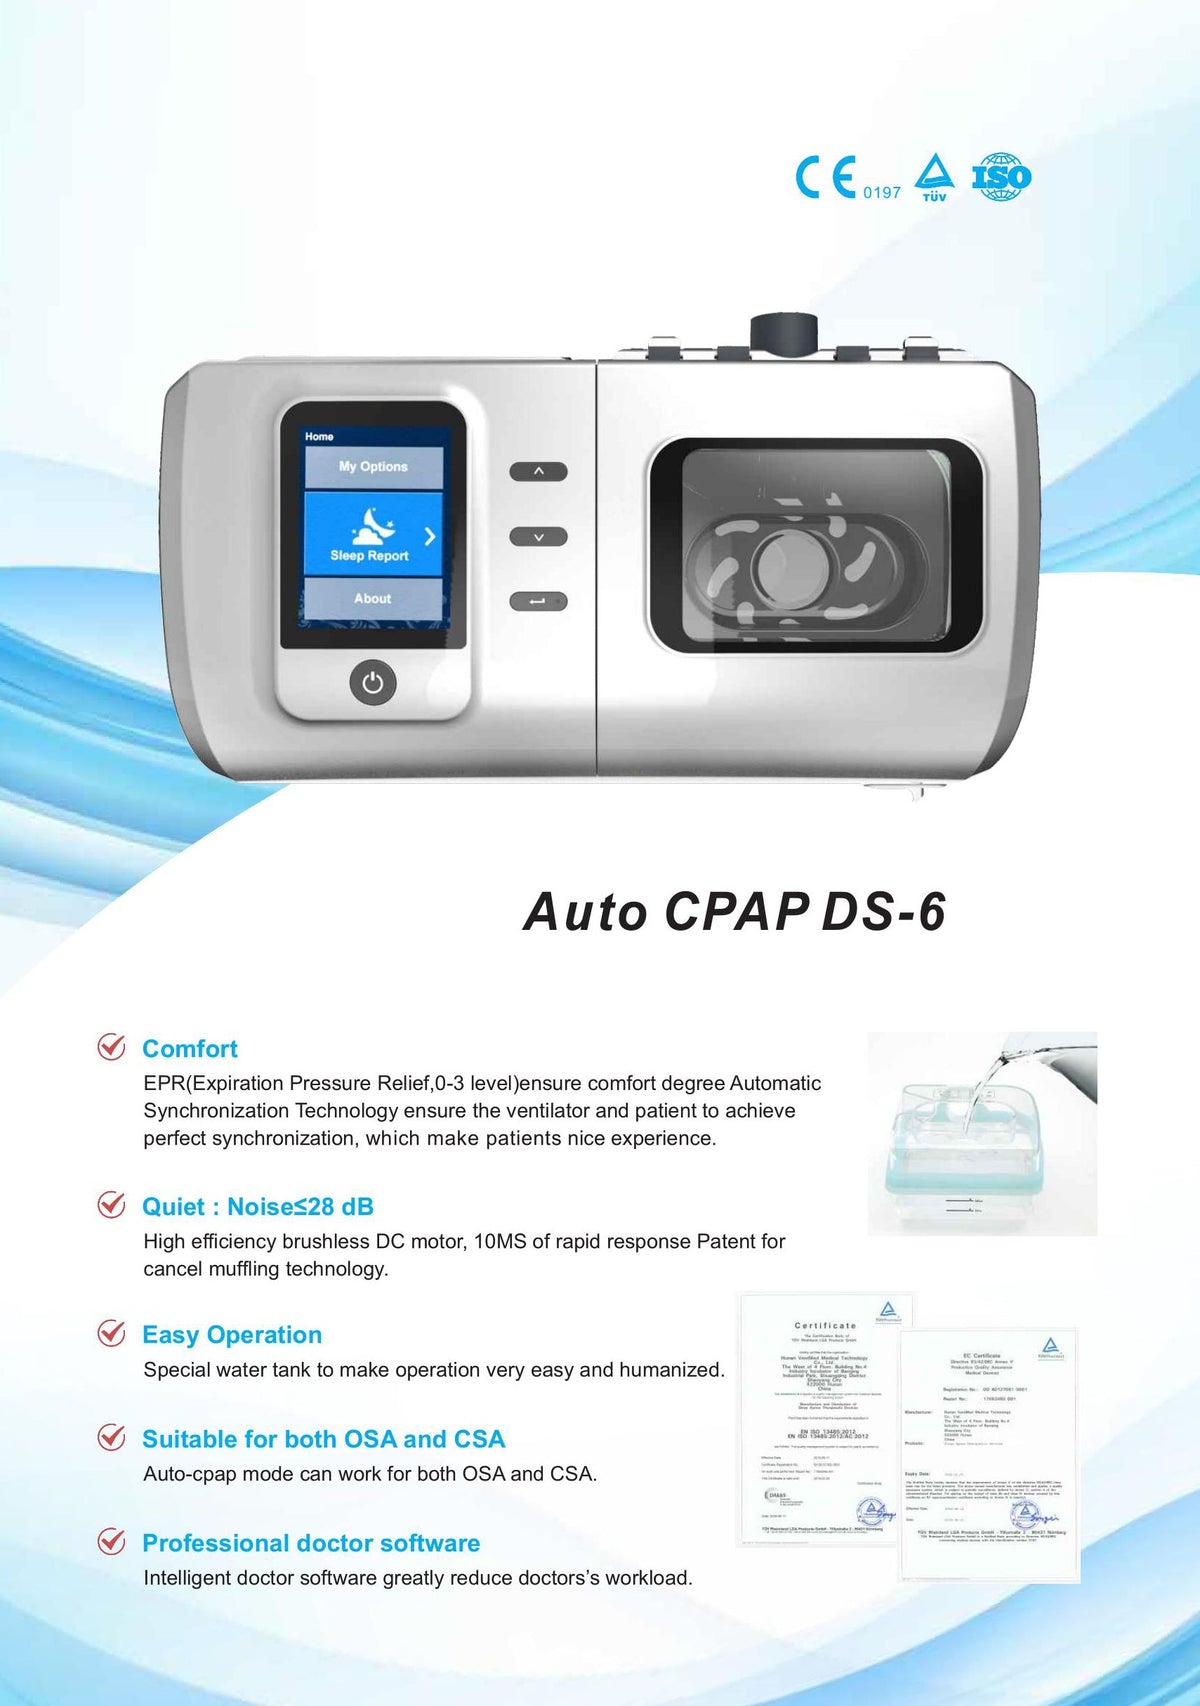 Auto CPAP Machine Sleep Apnea Therapeutic Devices Household Portable Travel CPAP With Nasal Mask